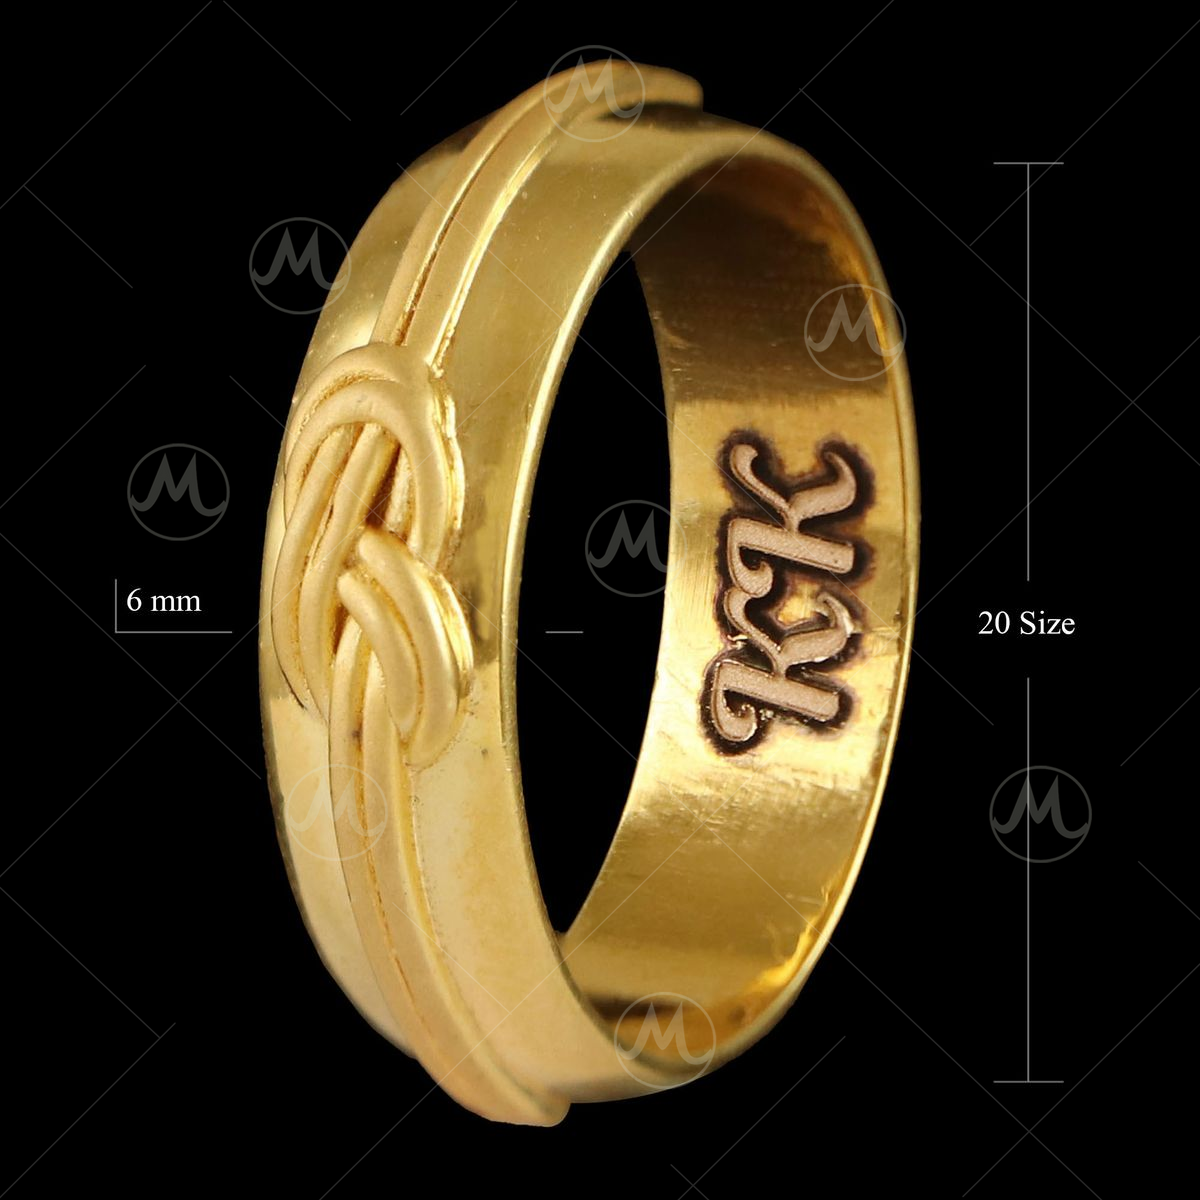 Personalized Pinky Signet Cluster Square Ring For Men Stainless Steel Band  With Gold Tone Anillos Classic Male Jewelry From Troywilliams, $8.25 |  DHgate.Com